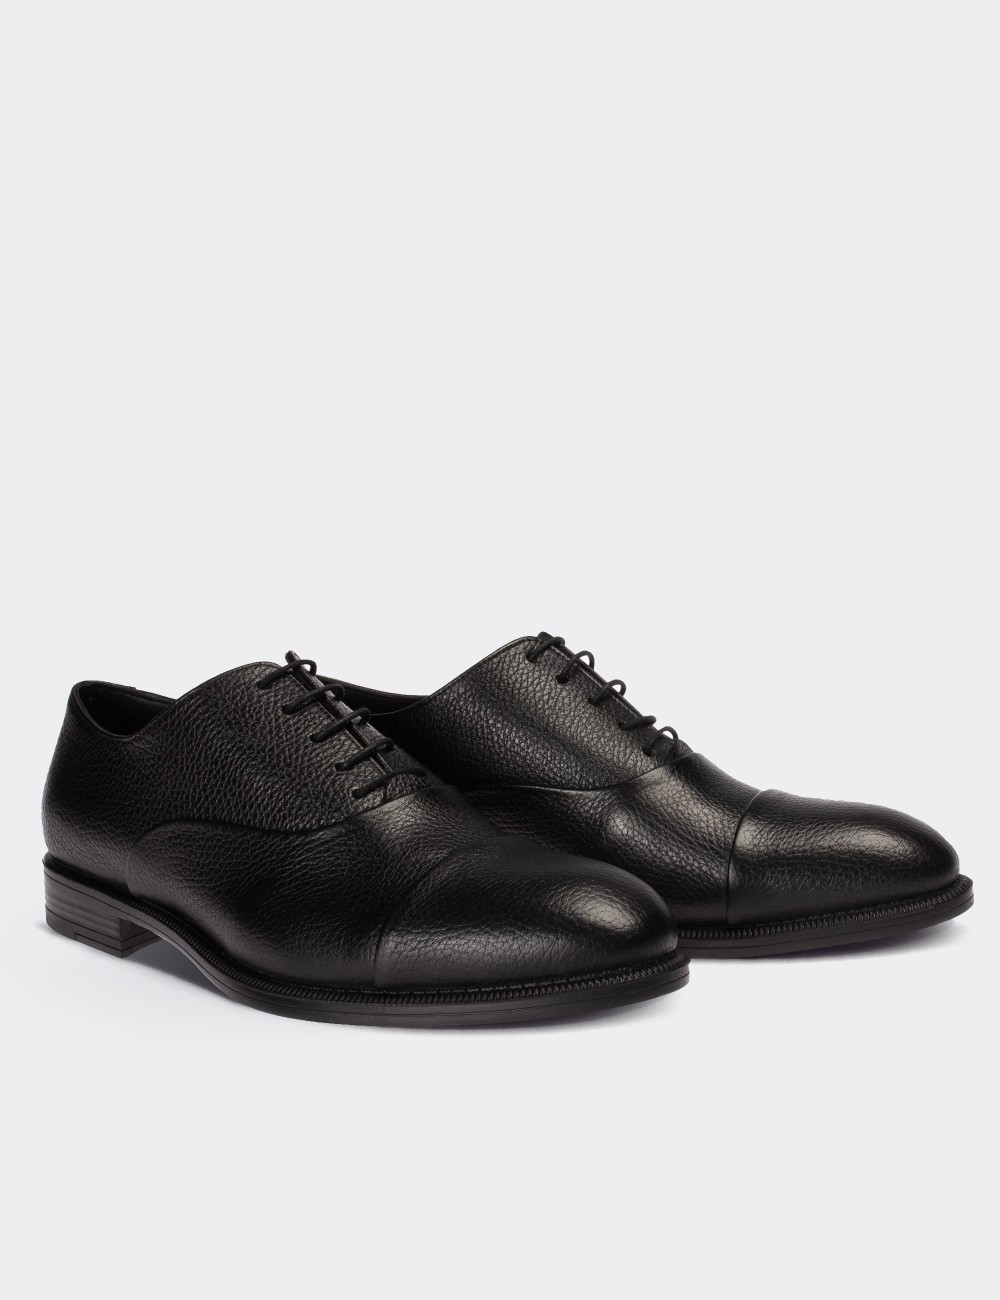 Black  Leather Classic Shoes - 01026MSYHC05